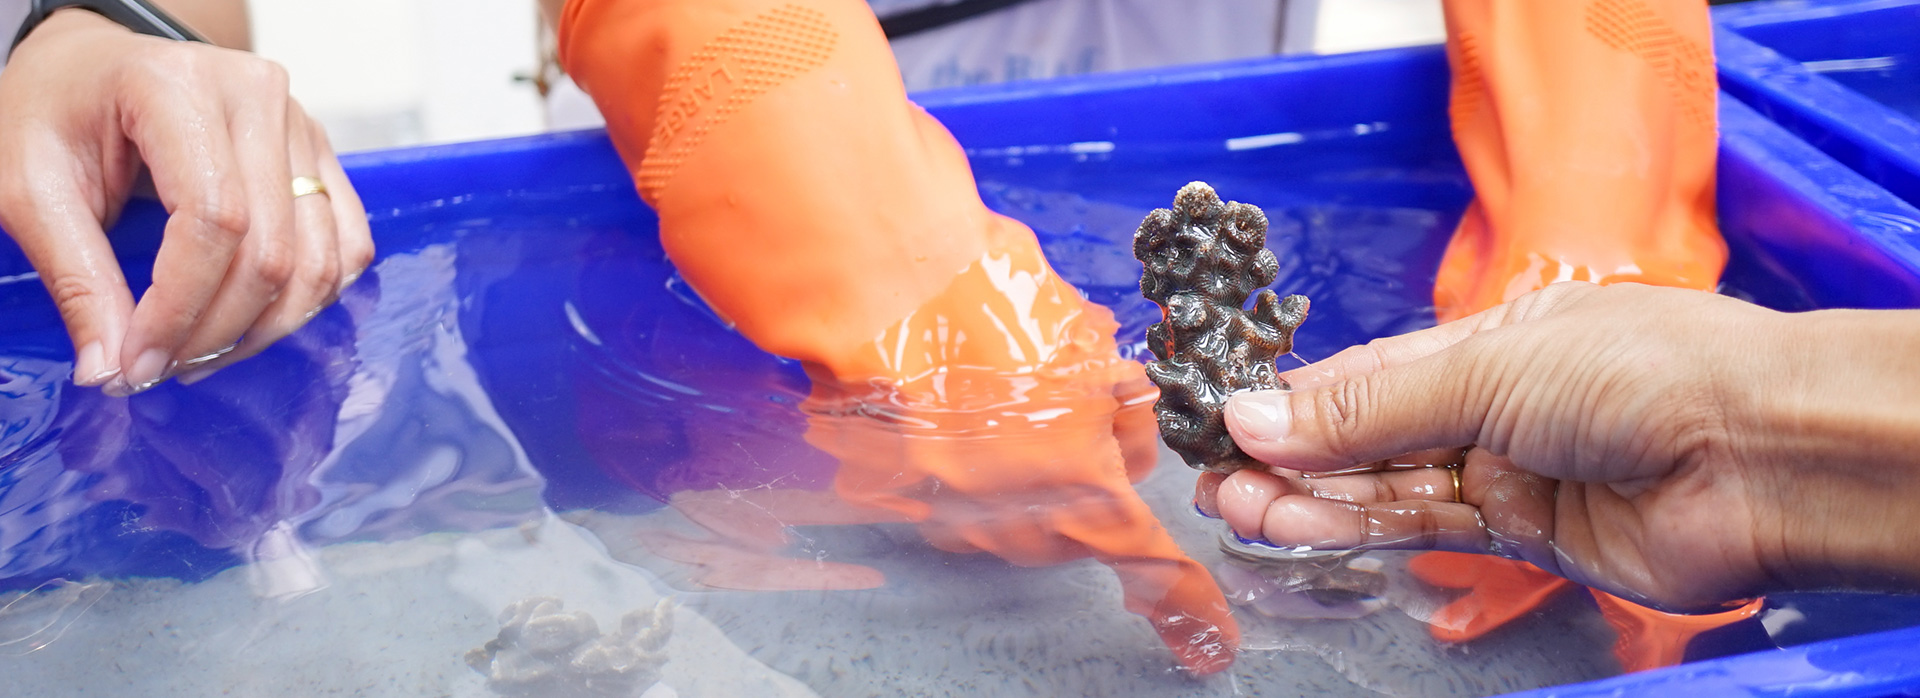 researchers cleaning a coral in a blue bin filled with water  